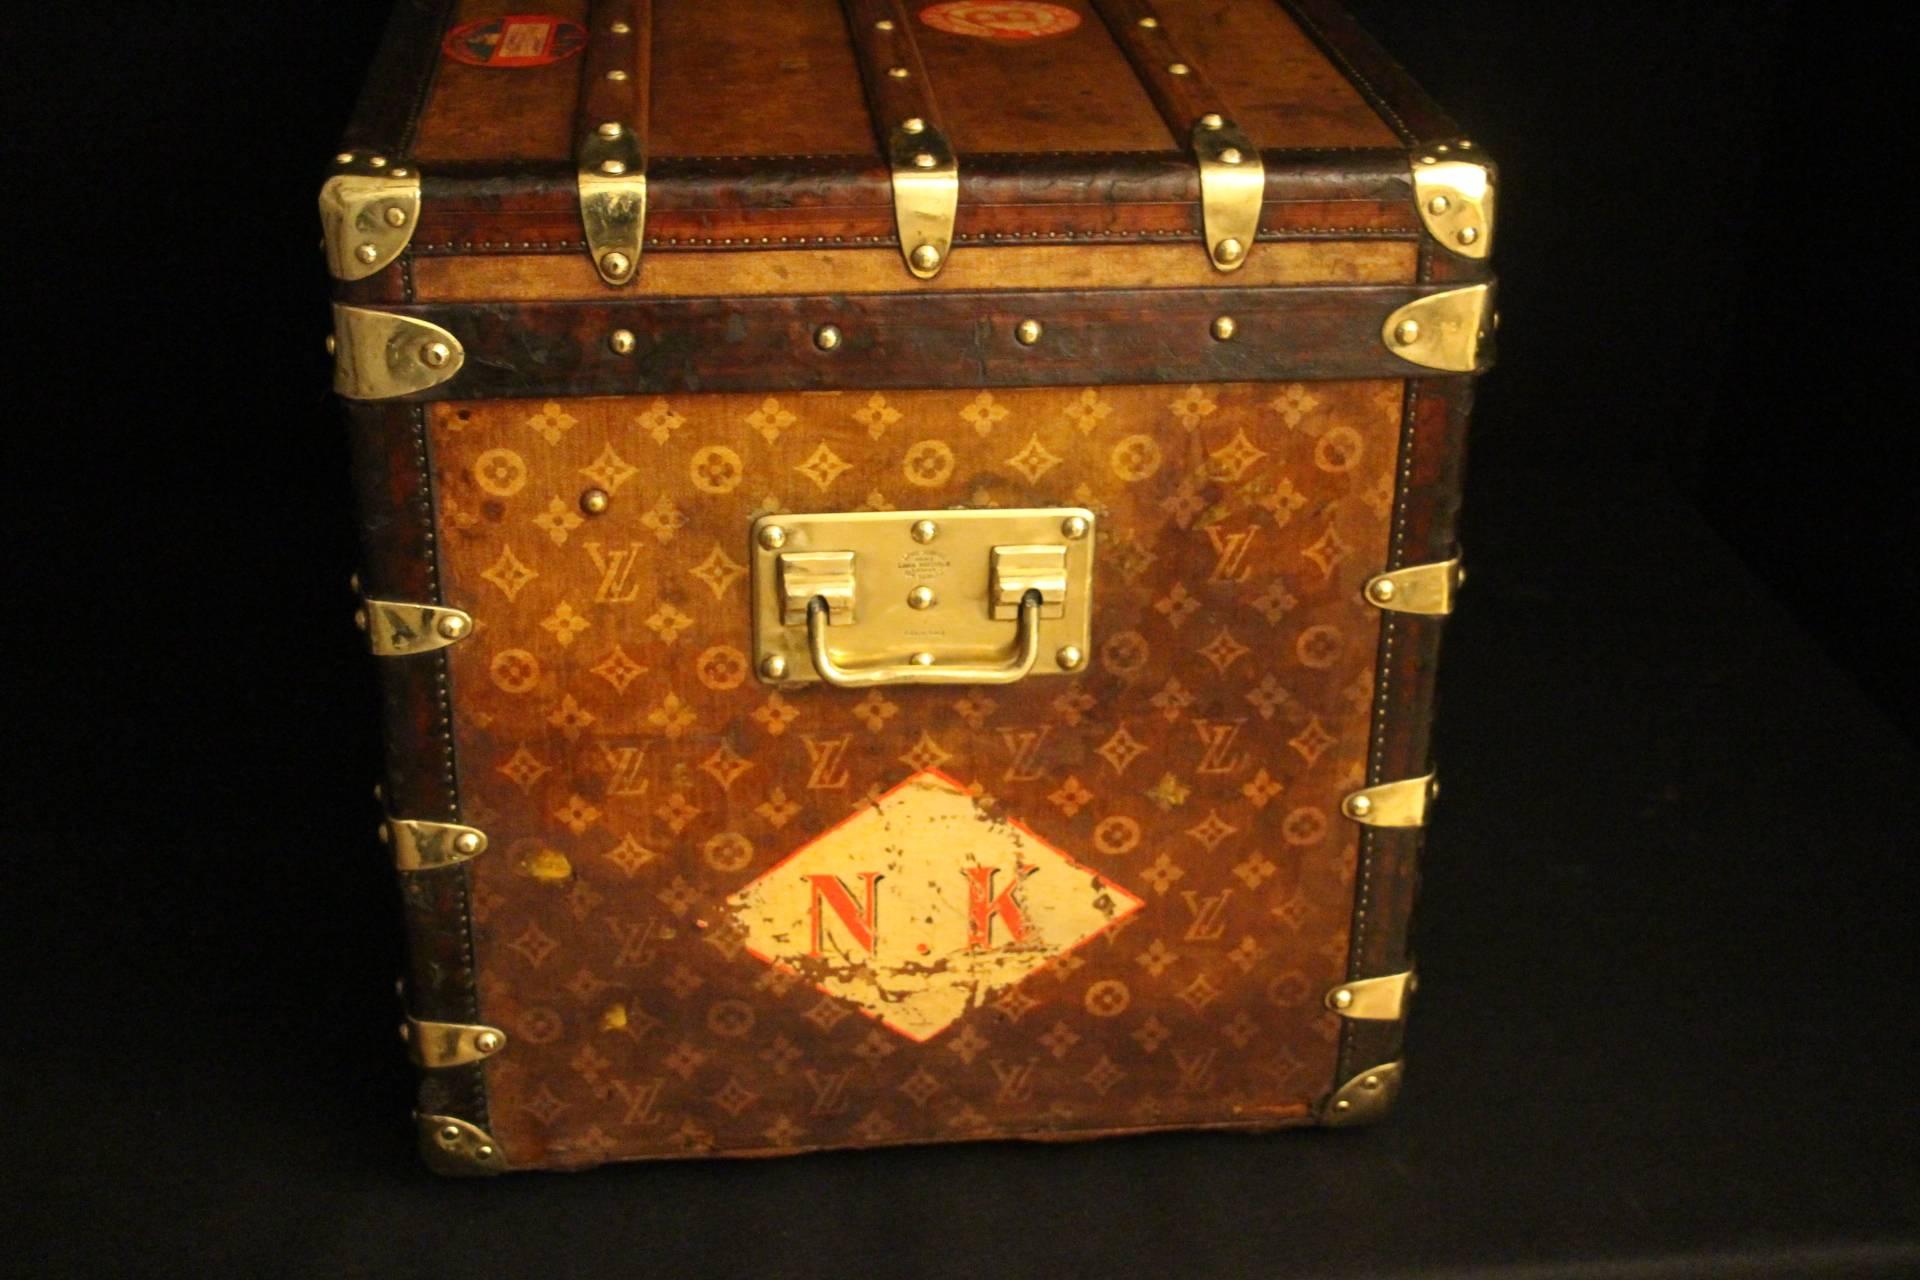 This top of the range Louis Vuitton steamer trunk features tissé canvas, leather trim, brass side handles, corners and all stamped LV studs. I t has got very elegant proportions as well as a very warm patina. All original.
Its interior is original